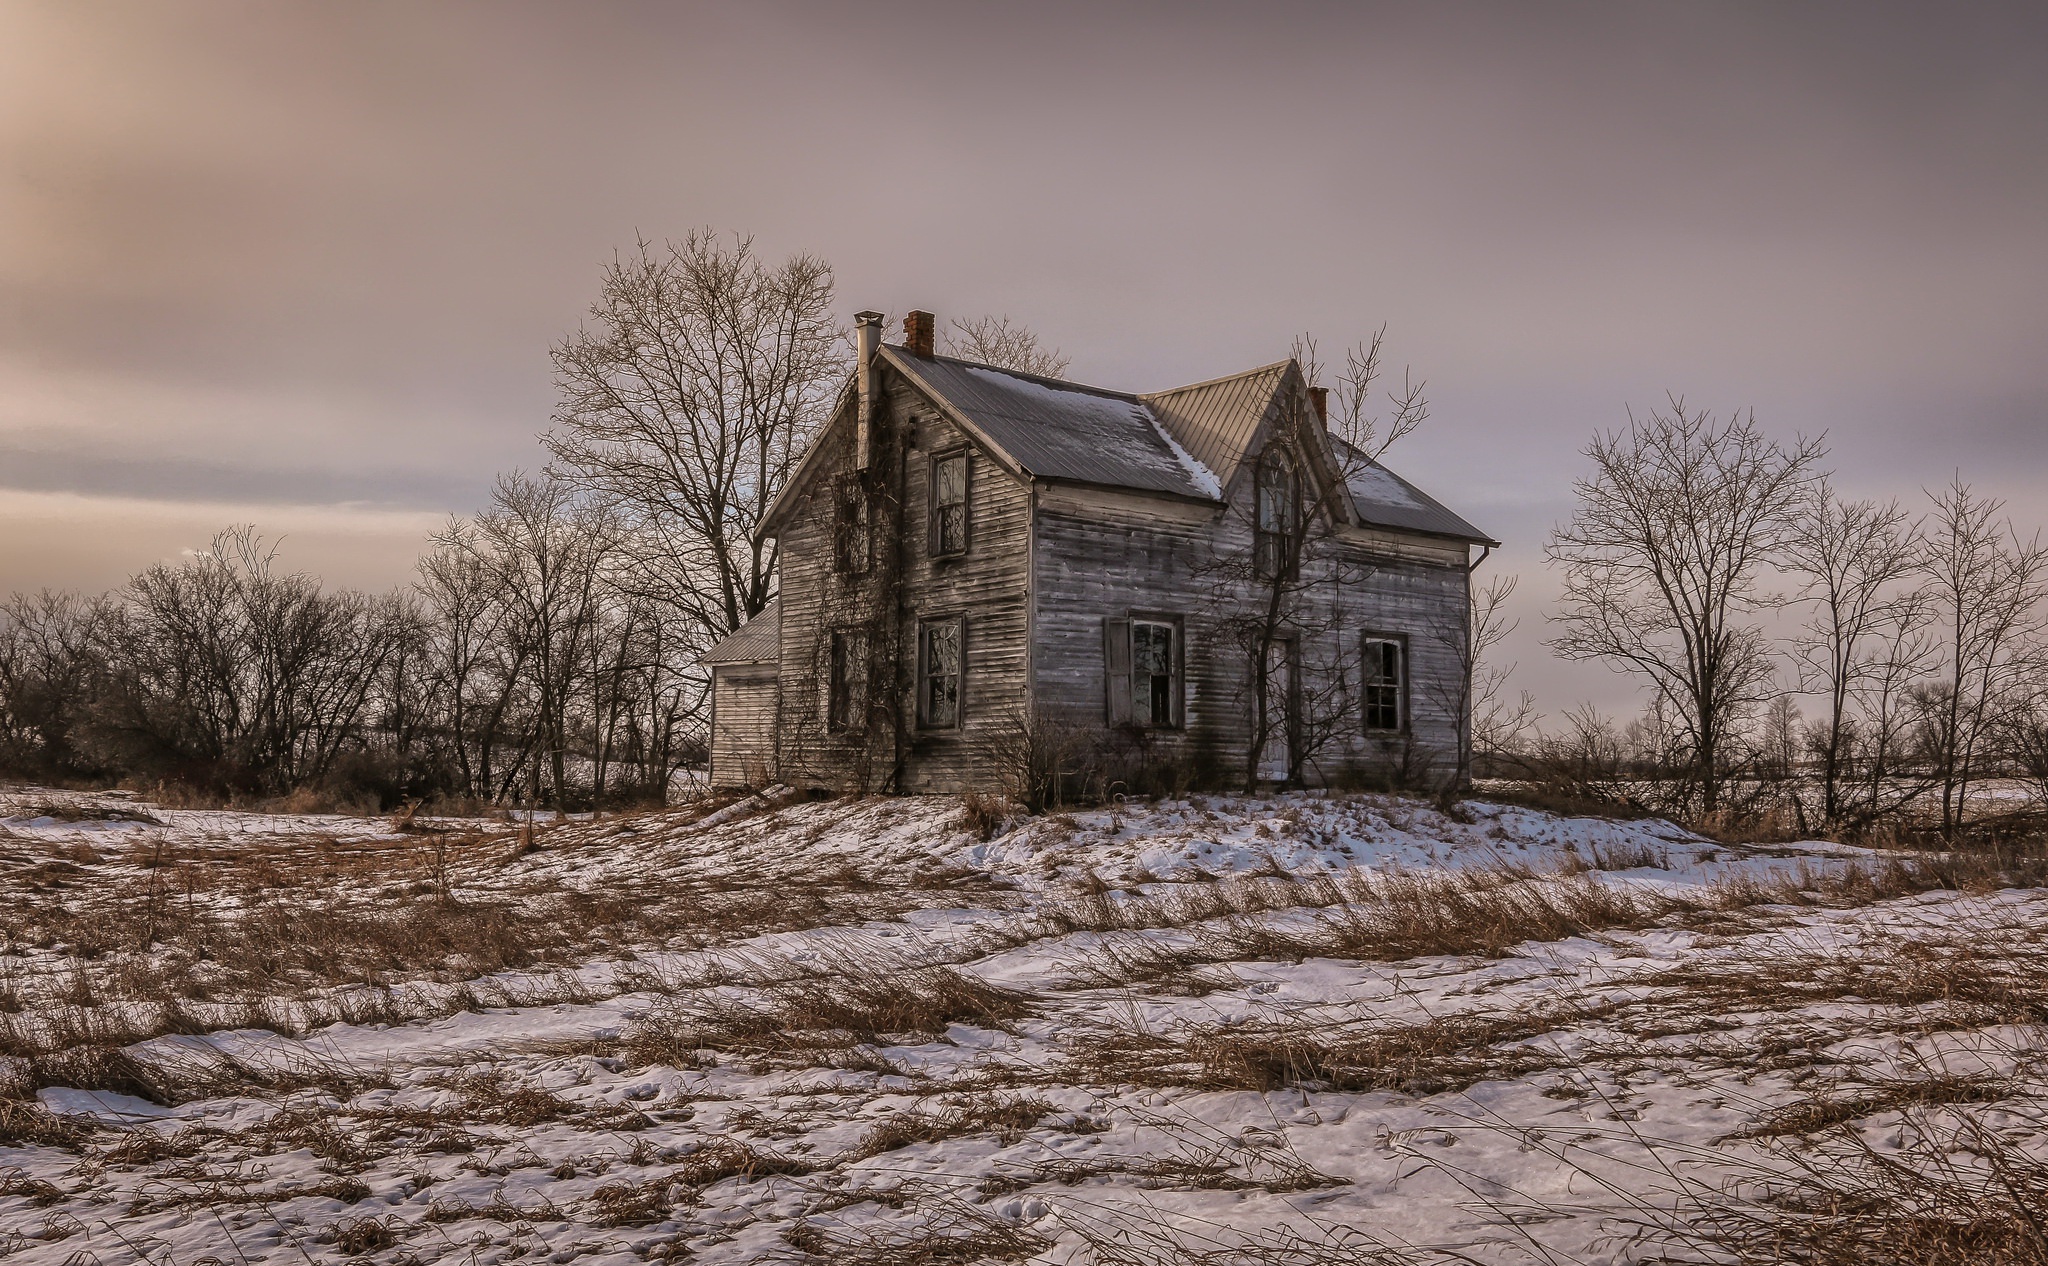 General 2048x1266 landscape old house winter abandoned snow nature field